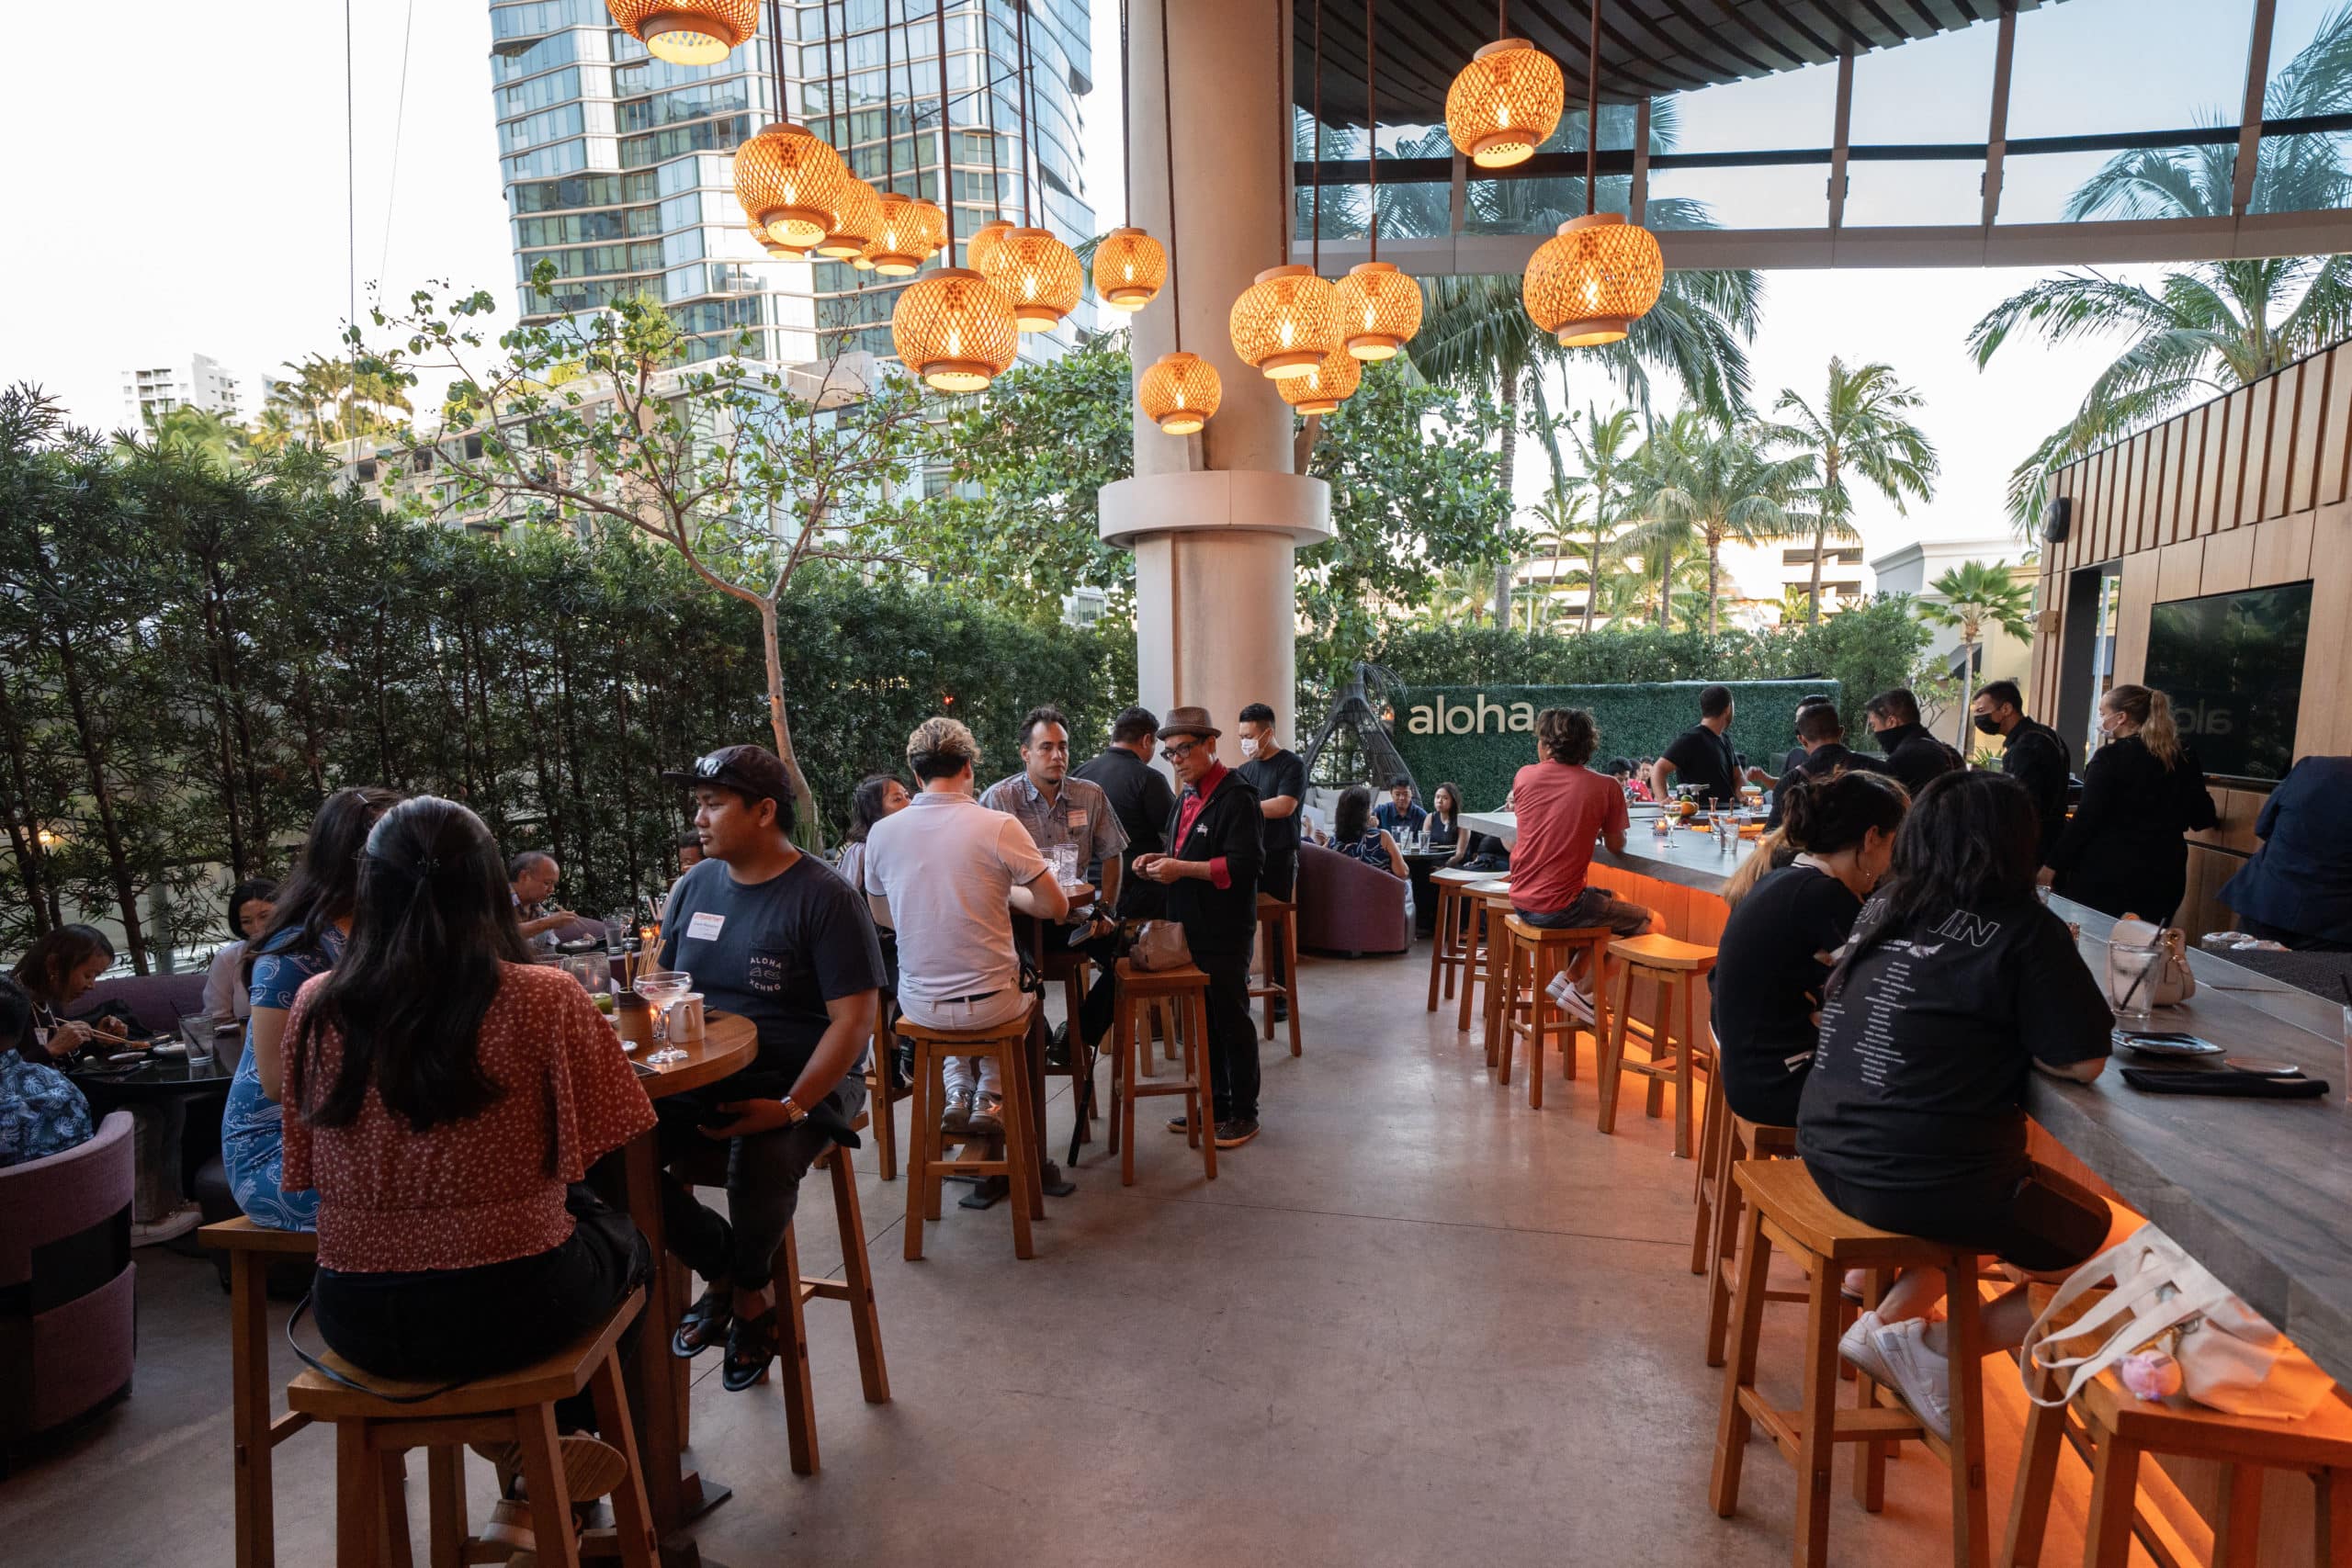 Join us in welcoming @lbdhawaii to the neighborhood! Sip and savor hand-crafted beverages and Japanese tapas alfresco at this innovative Japanese Bar & Lounge in Ward Village. Come out and celebrate their grand opening today, August 12 from 4pm – 11:30pm!